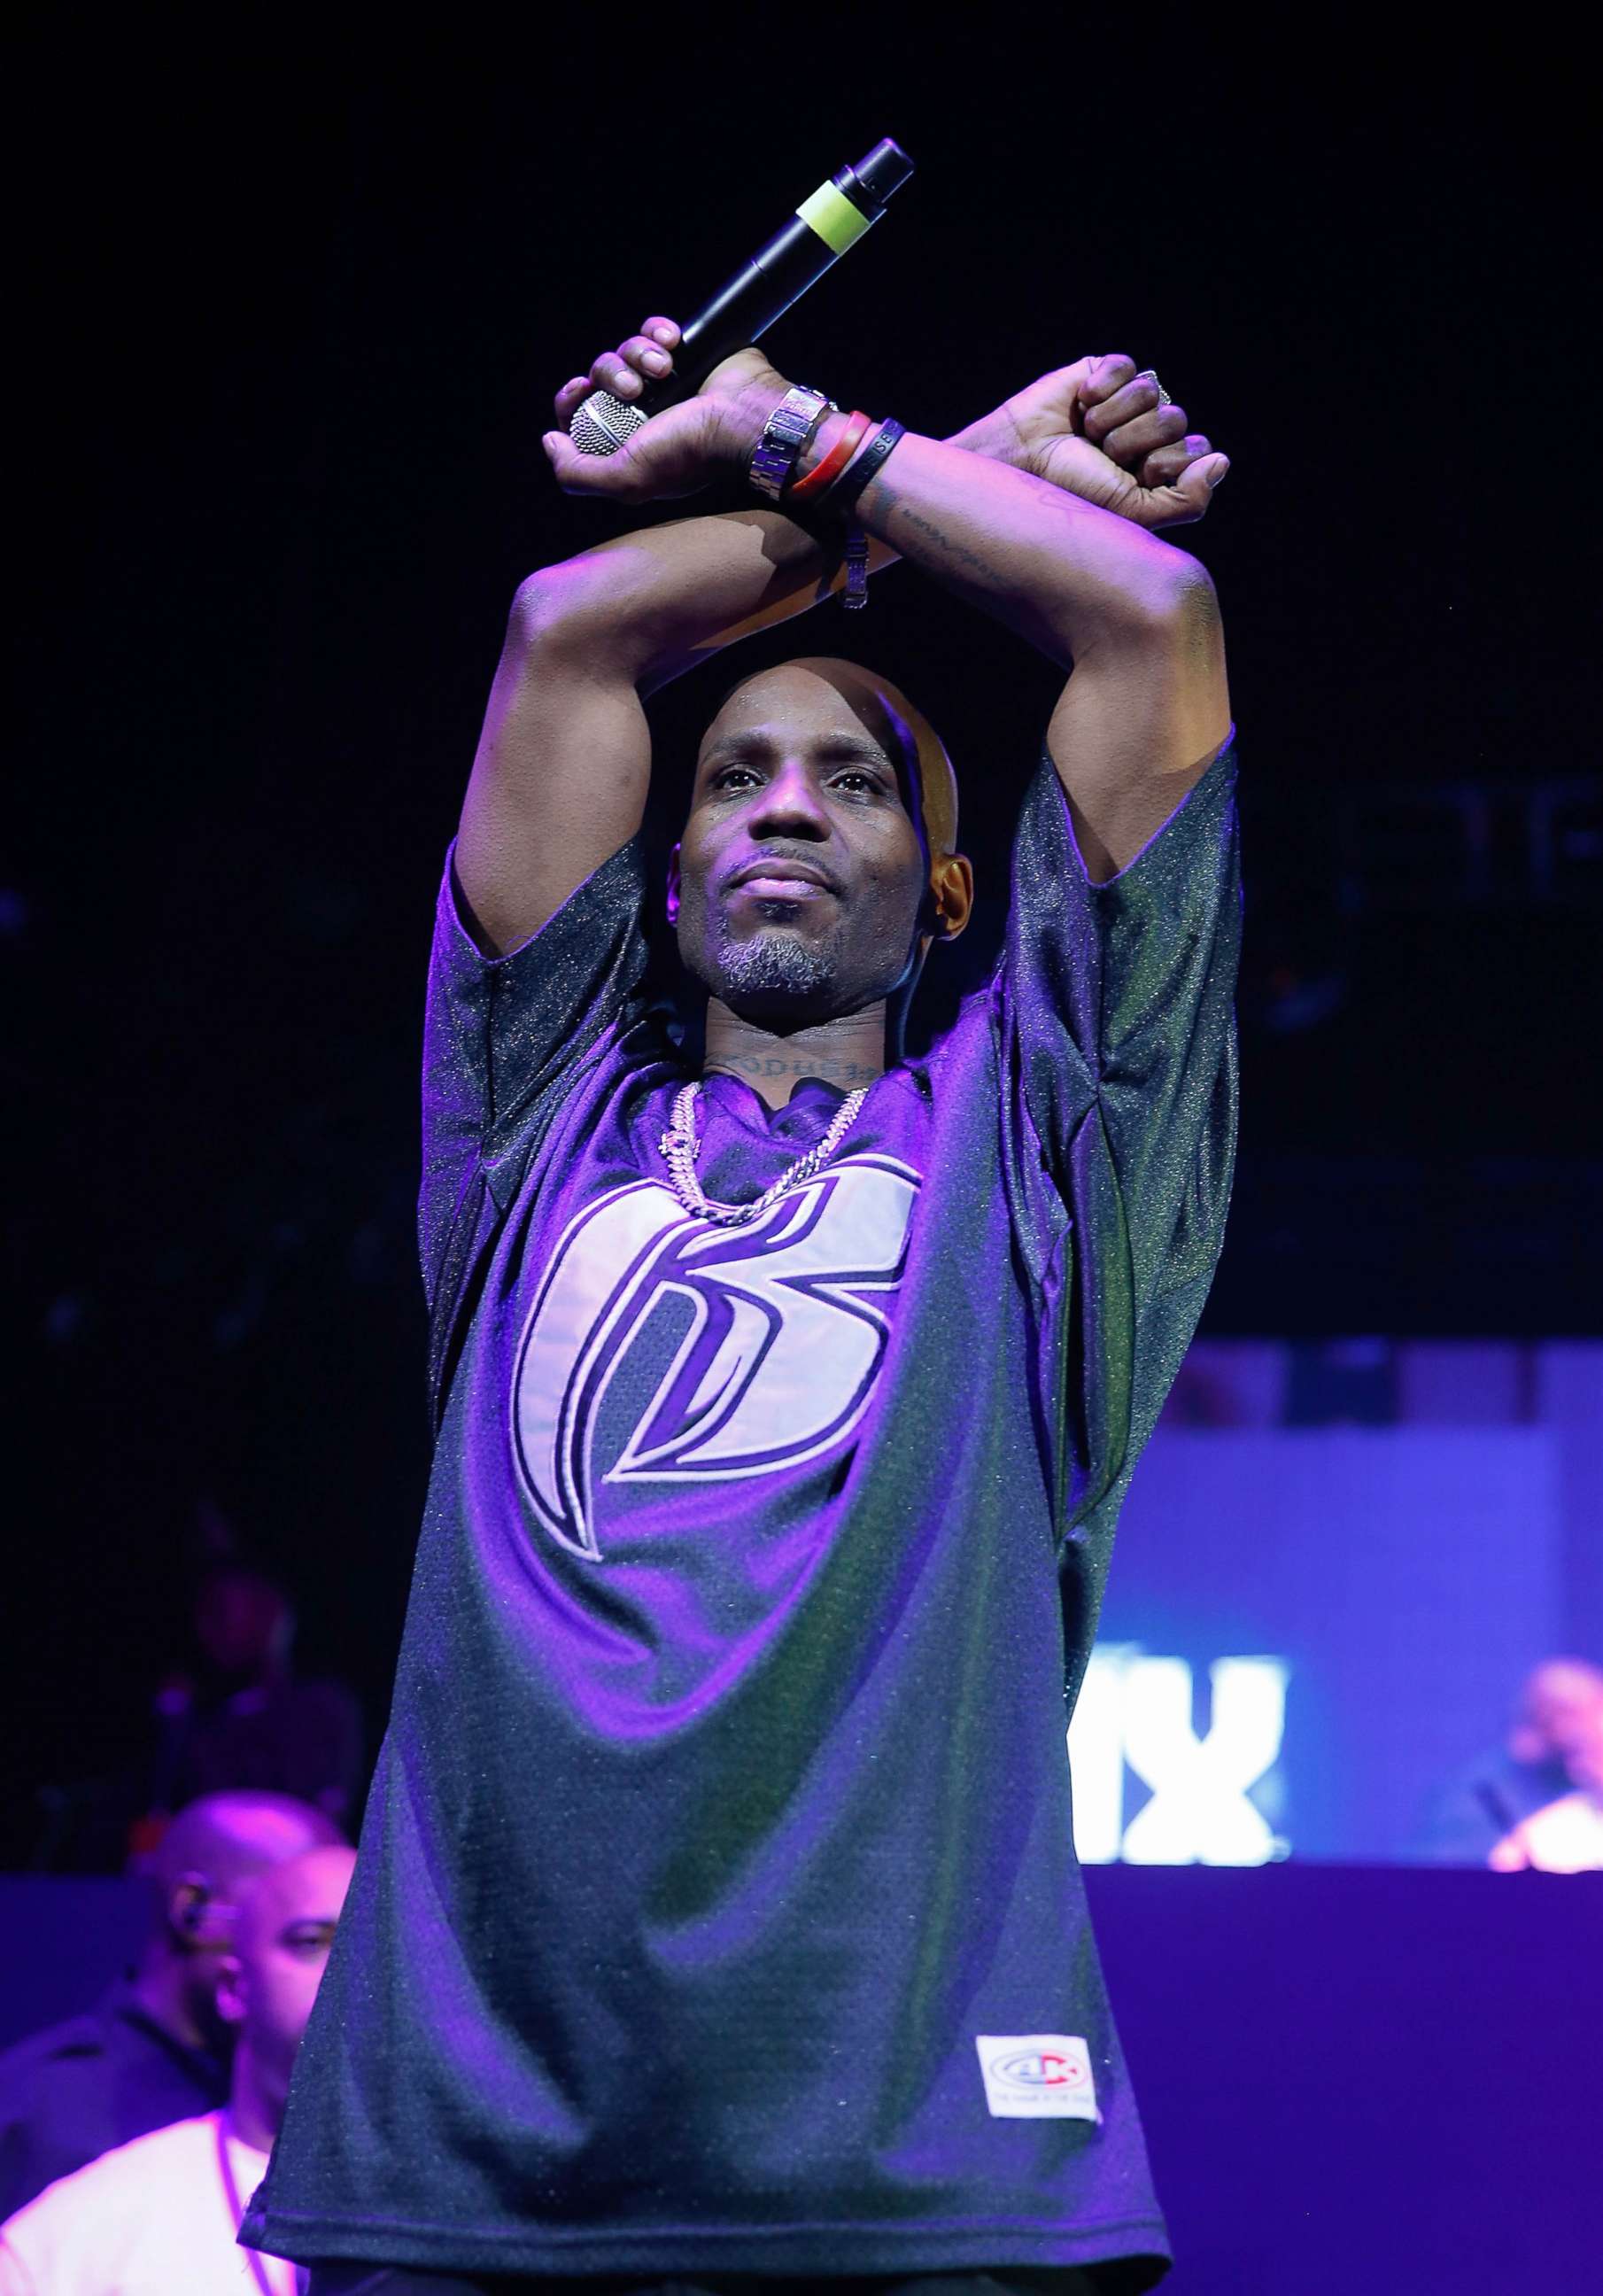 PHOTO: DMX performs during the Ruff Ryders and Friends Reunion Tour Past, Present and Future in Brooklyn, New York on April 21, 2017.